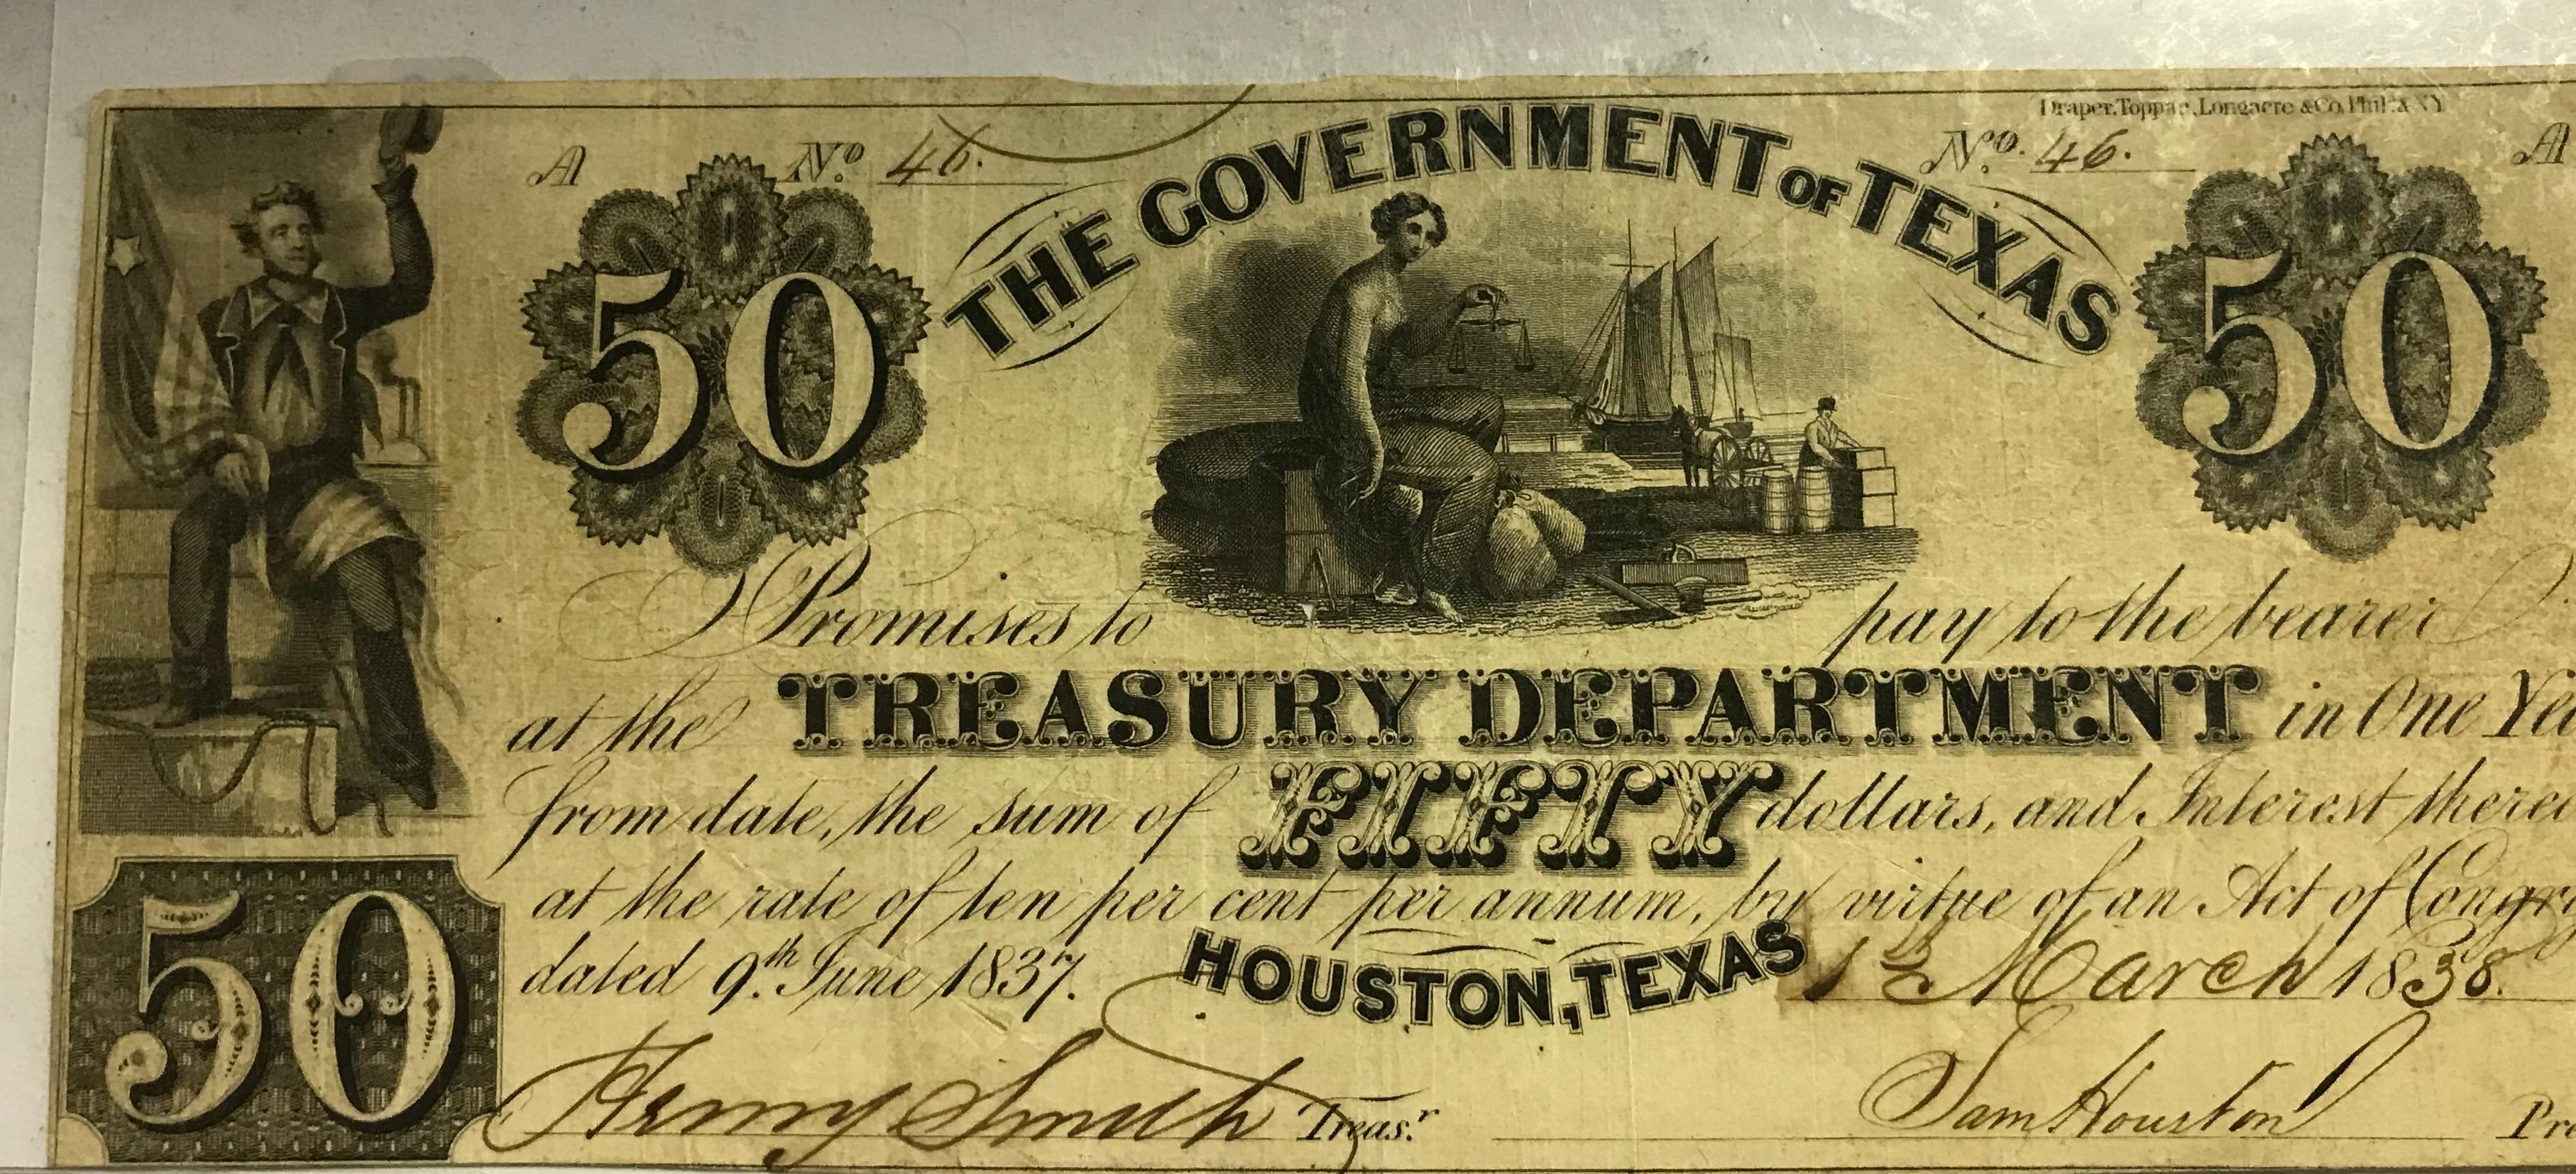 THE GOVERNMENT OF TEXAS ONE YEAR TREASURY BOND  AND SAM HOUSTON